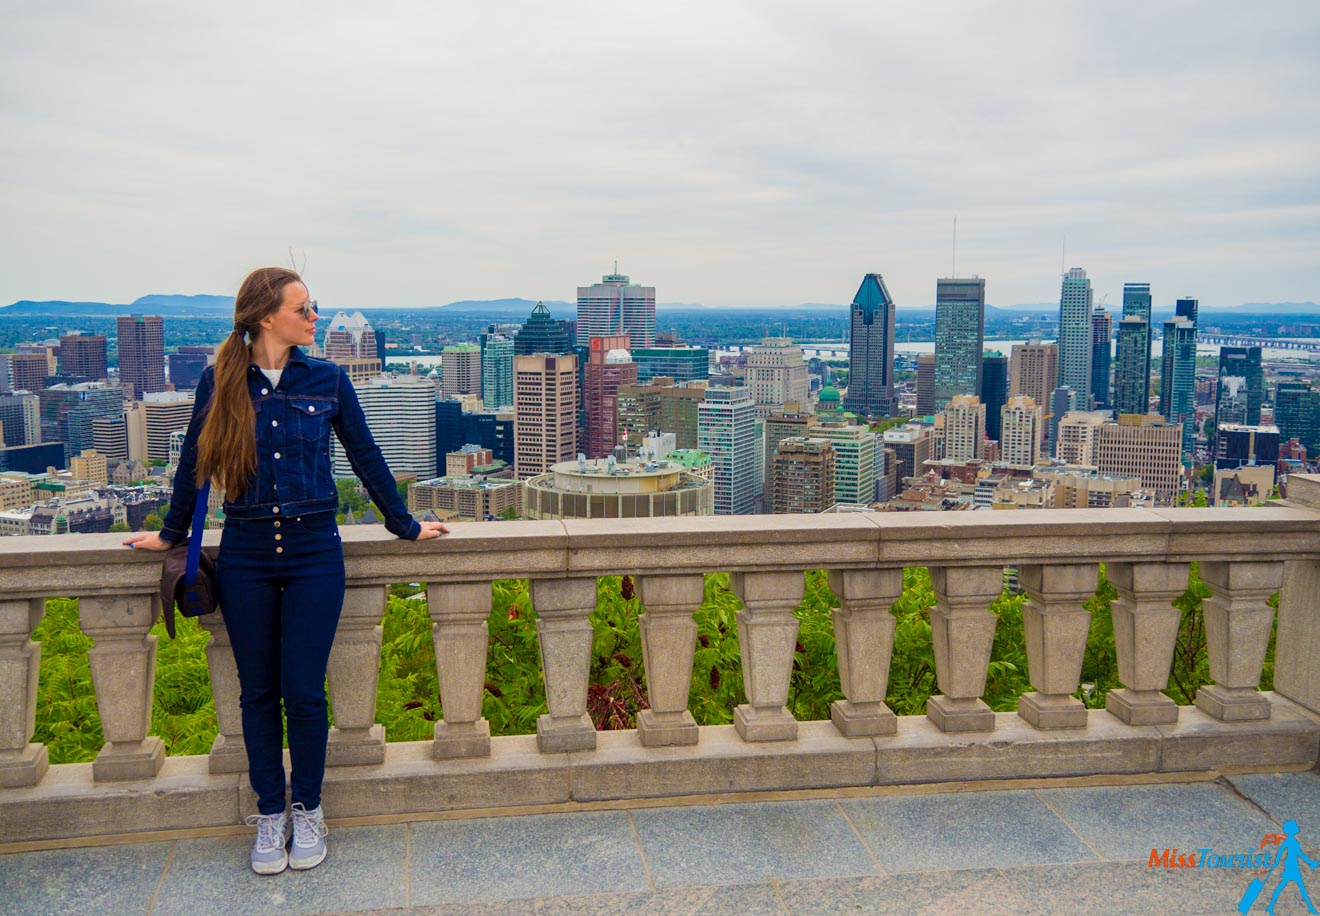 The writer of the post in a denim jacket and jeans standing at a lookout point with a panoramic view of Montreal's high-rise buildings and lush greenery in the foreground.